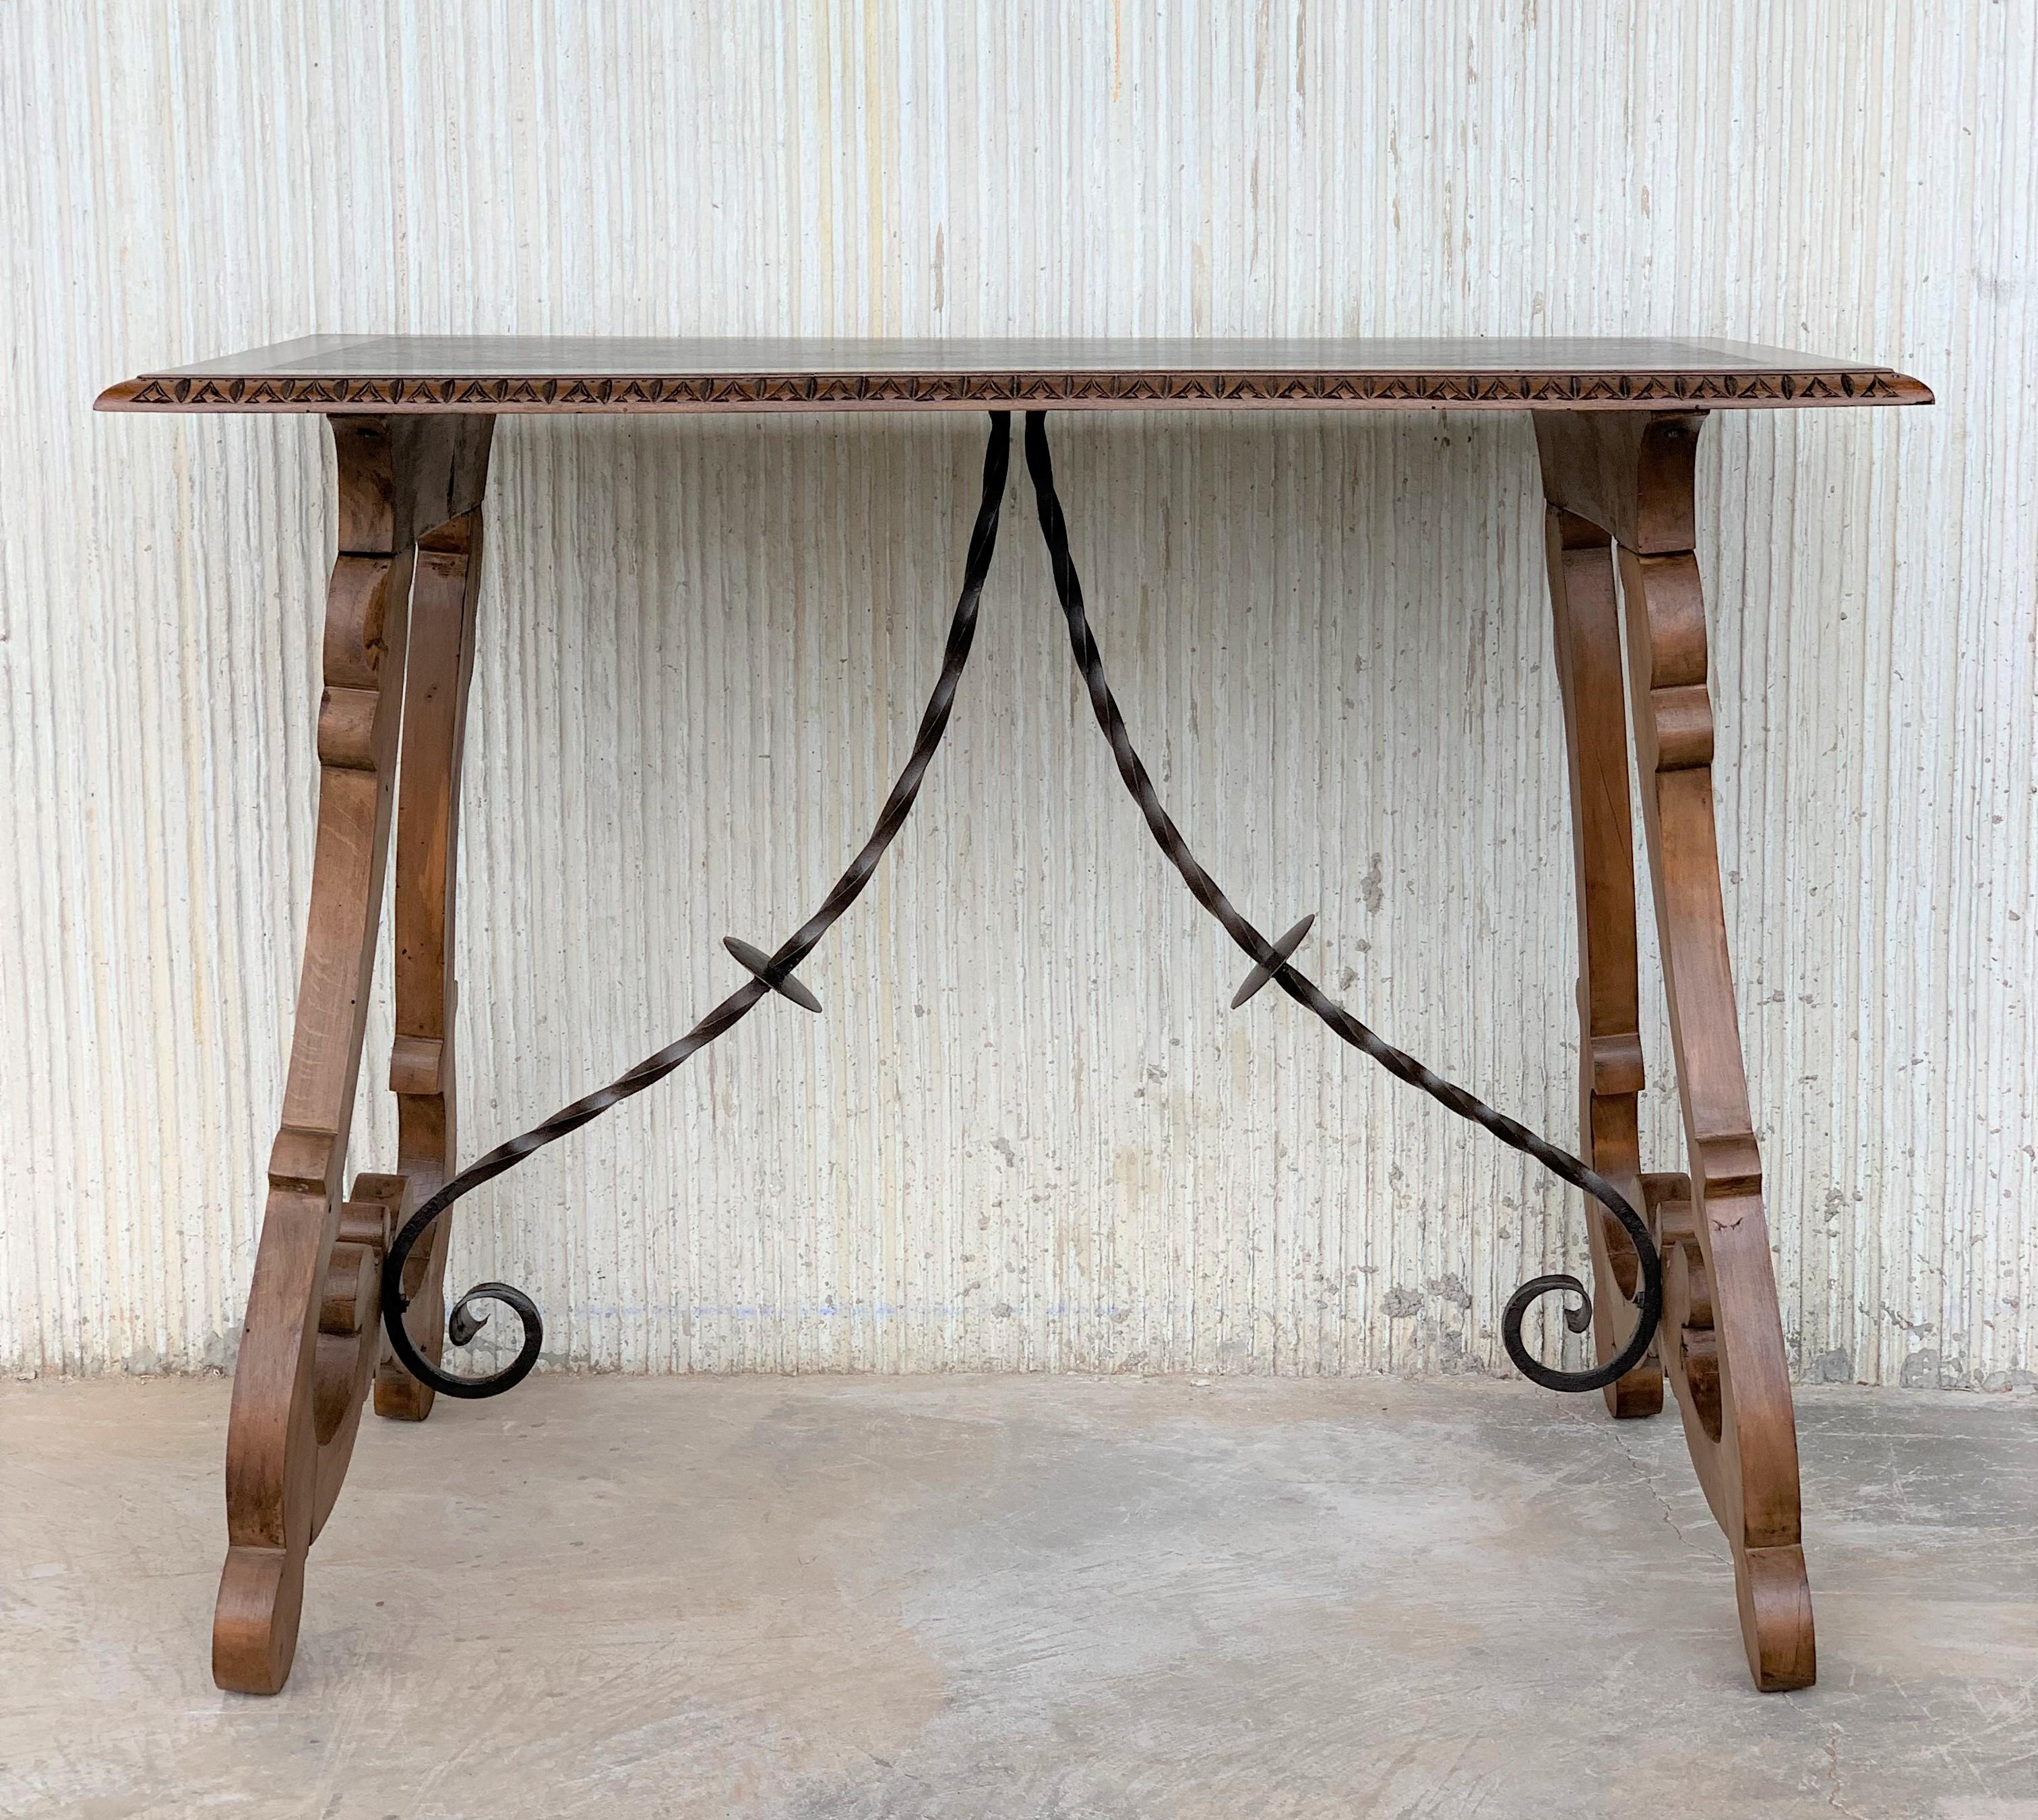 19th Spanish farm table with iron stretchers
Hand carved top
Completely restored.